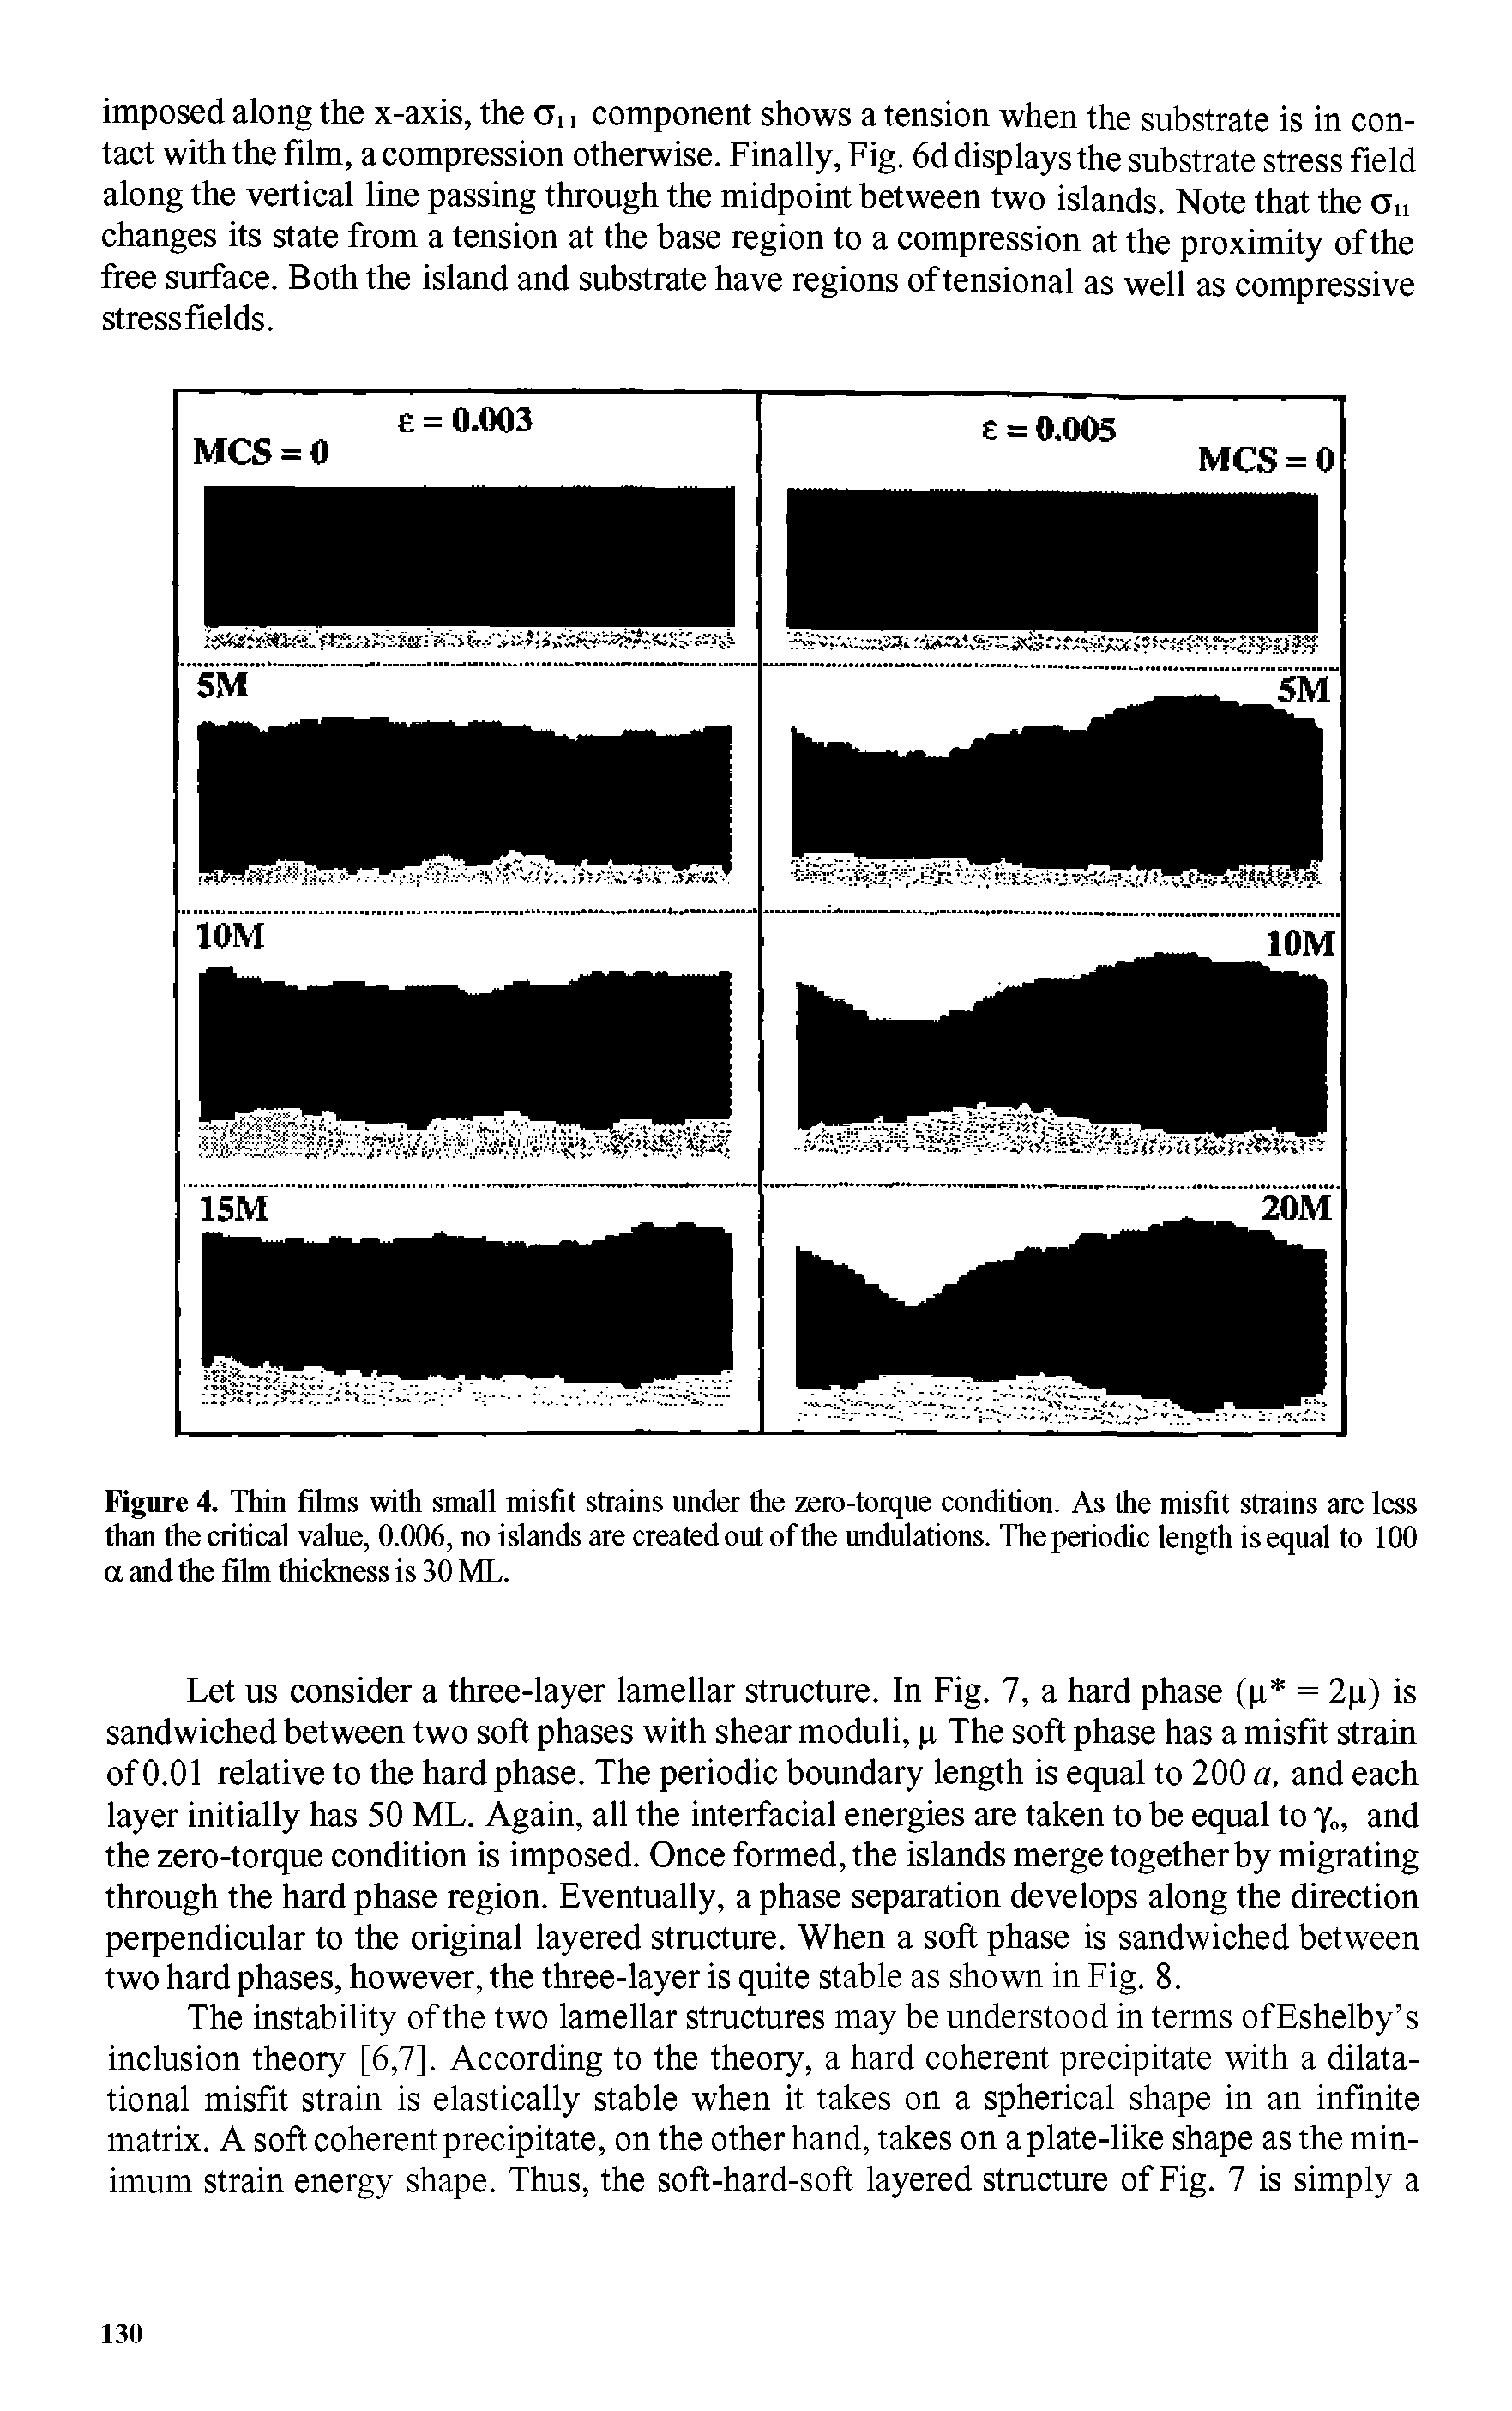 Figure 4. Thin films with small misfit strains under the zero-torque condition. As the misfit strains are less than the critical value, 0.006, no islands are created out of the undulations. The periodic length is equal to 100 a and the film thickness is 30 ML.